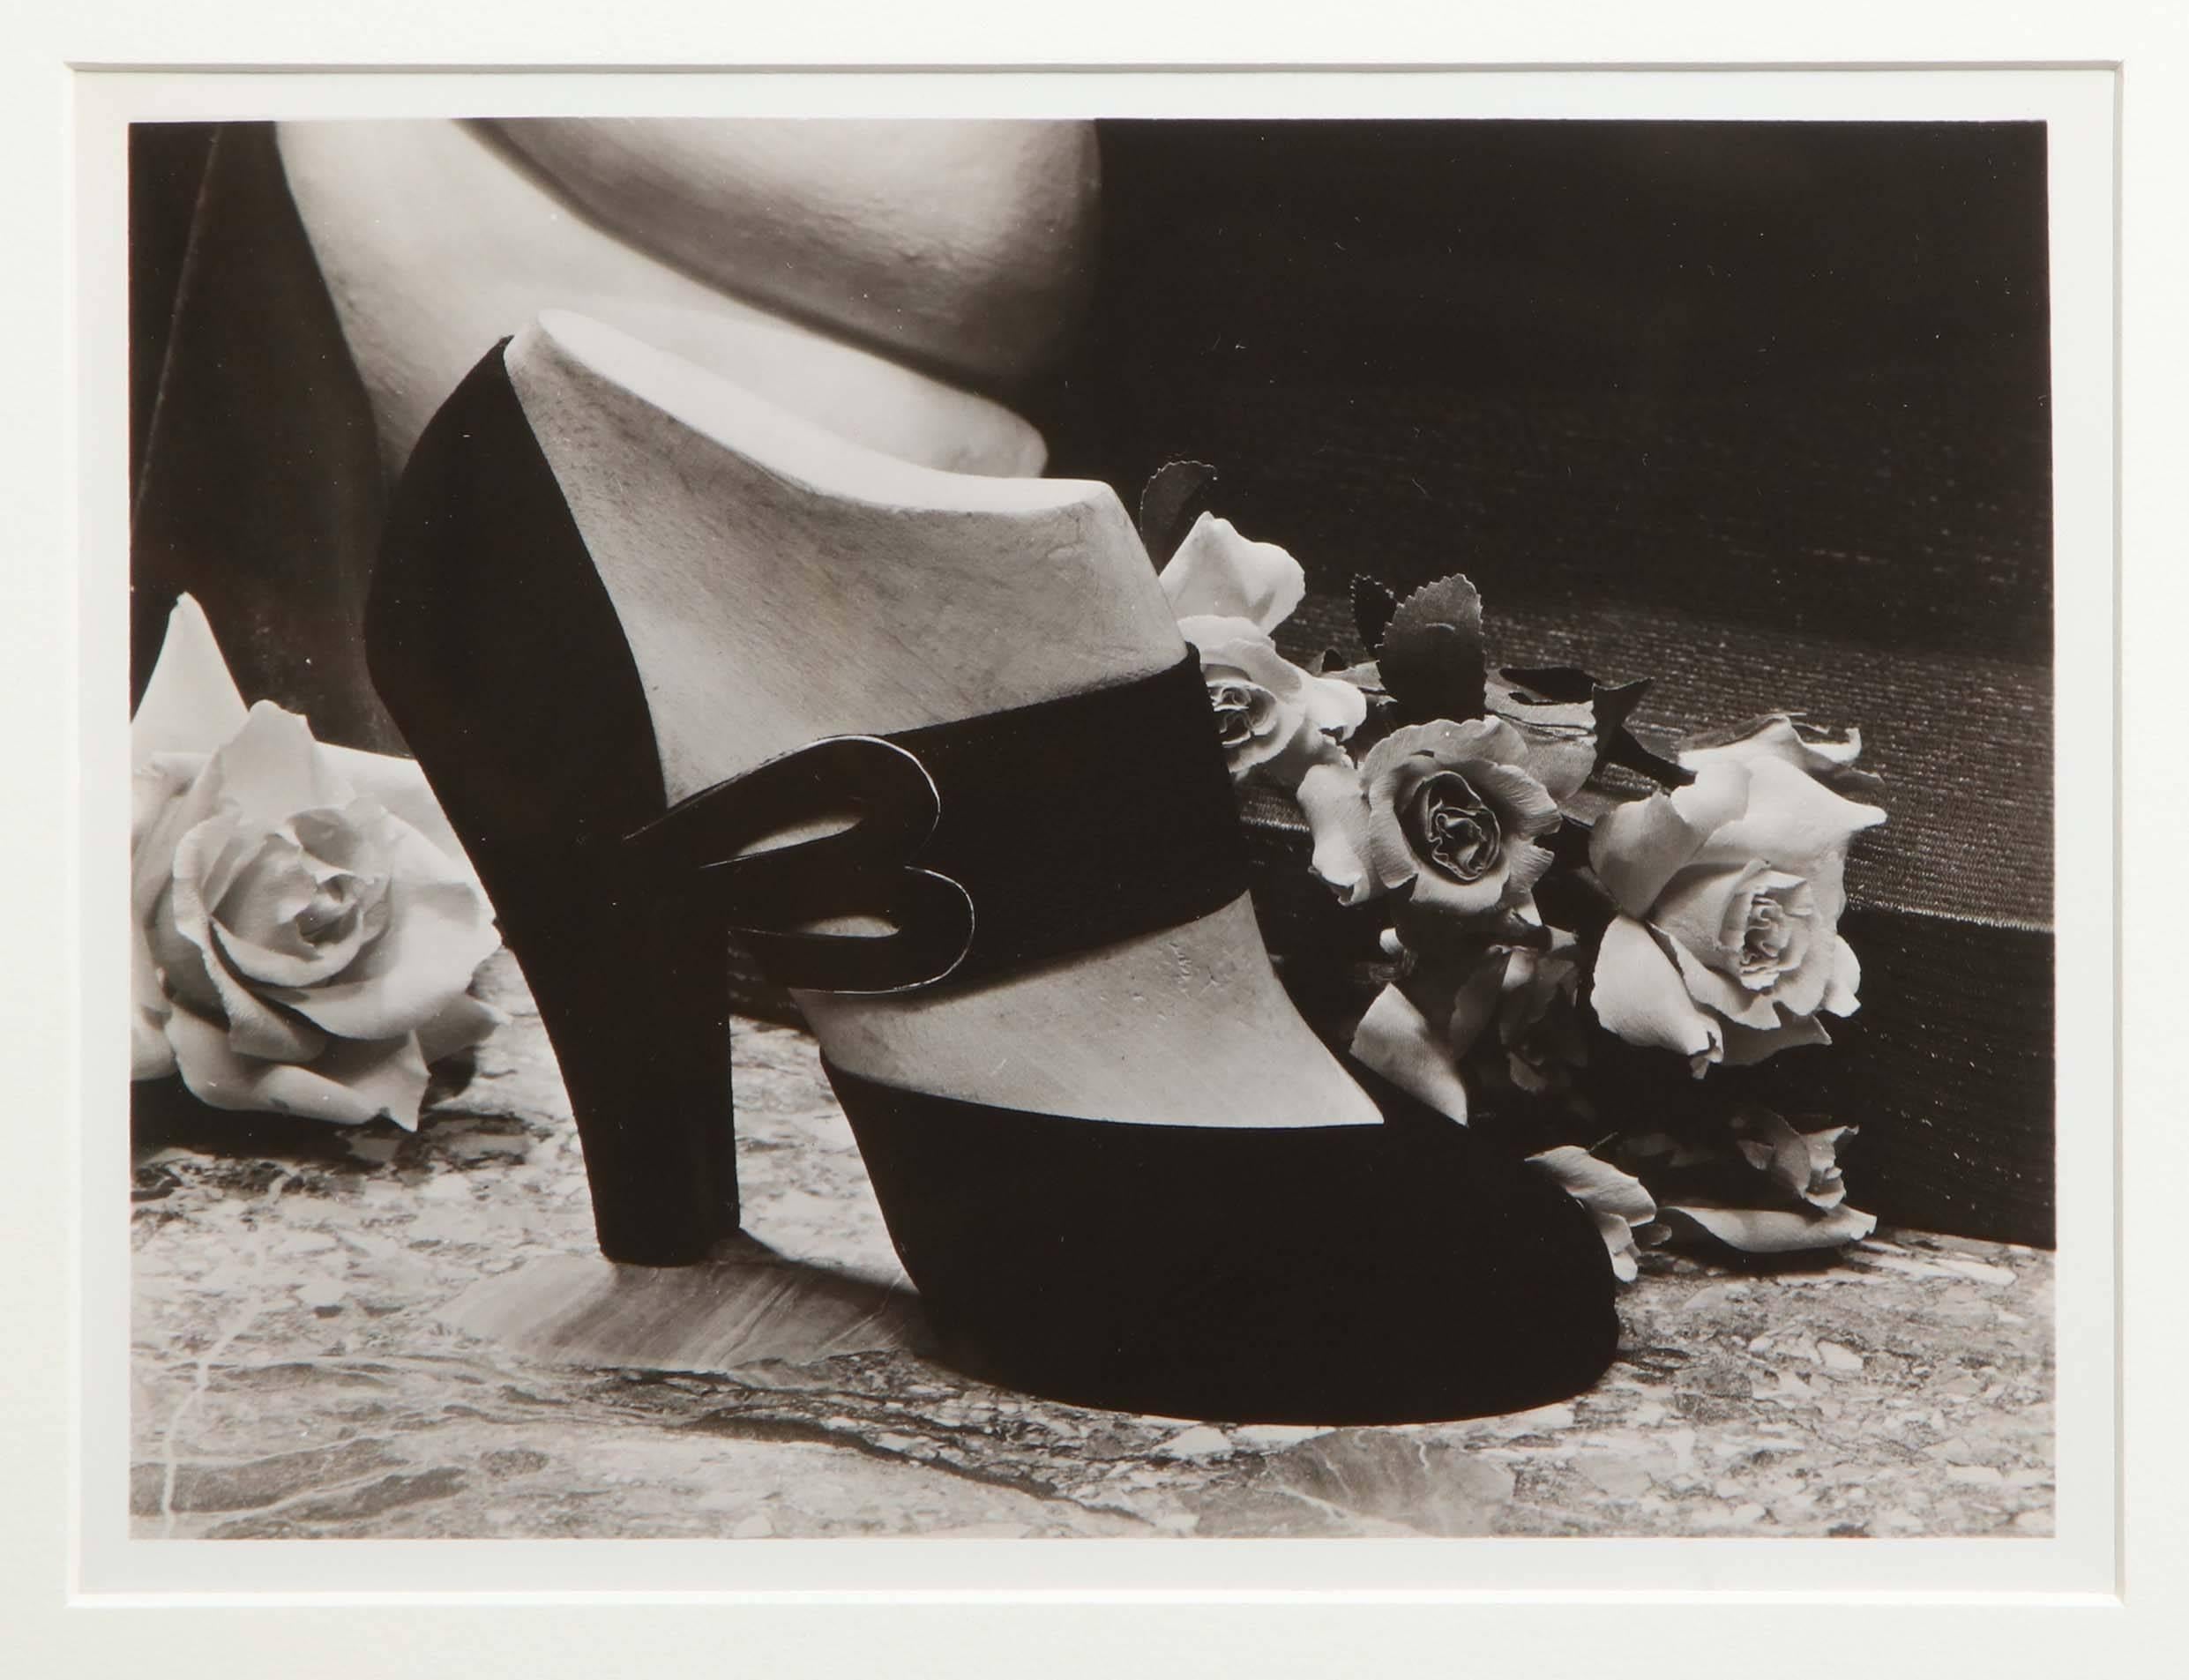 In 1947 John Stuart Cloud (Minneapolis 1914-2007) took a group of photographs as promotional tools for Thomas Taylor and Sons, Inc., a Hudson, Massachusetts manufacturer of elastic shoe goring, shoe and corset laces, braids and trimmings. The